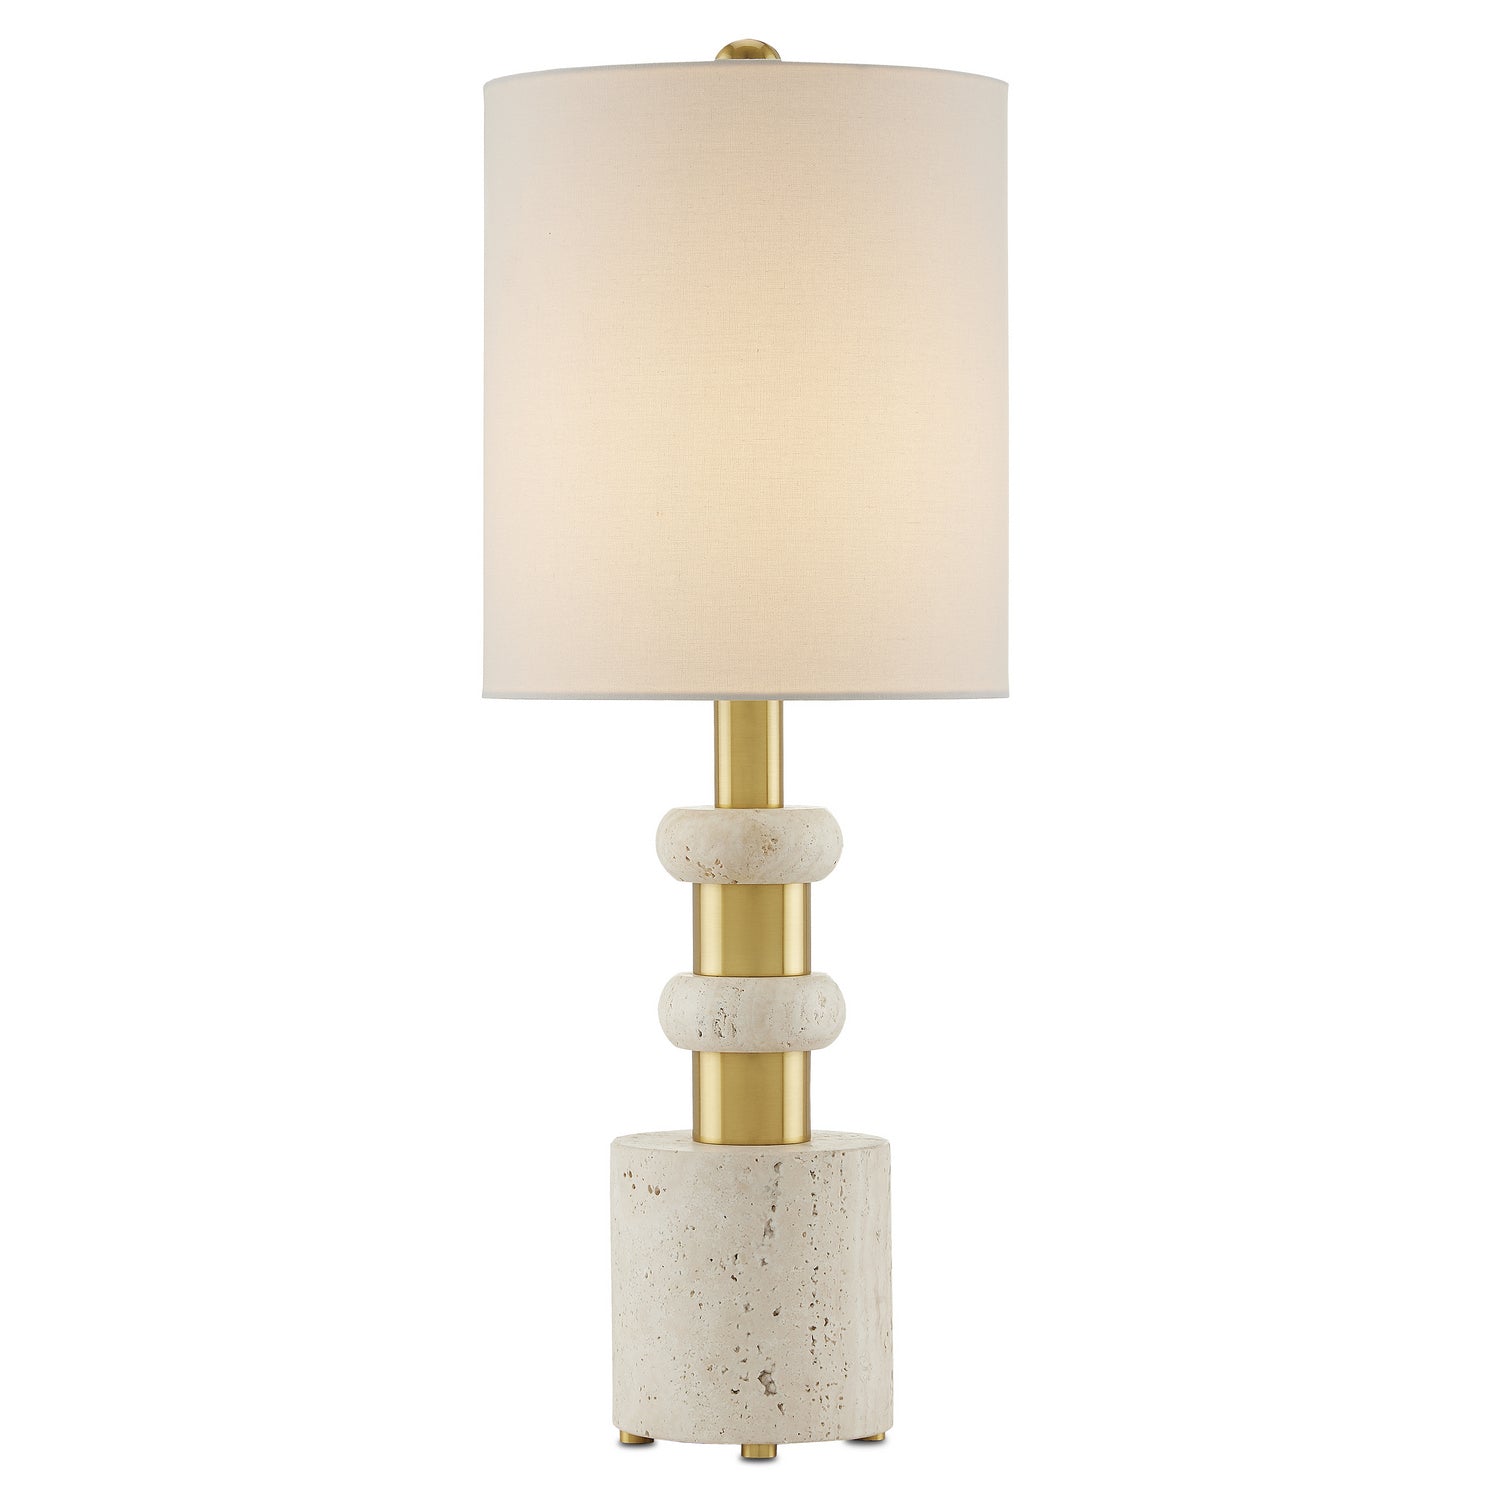 One Light Table Lamp from the Goletta collection in Beige/Antique Brass finish